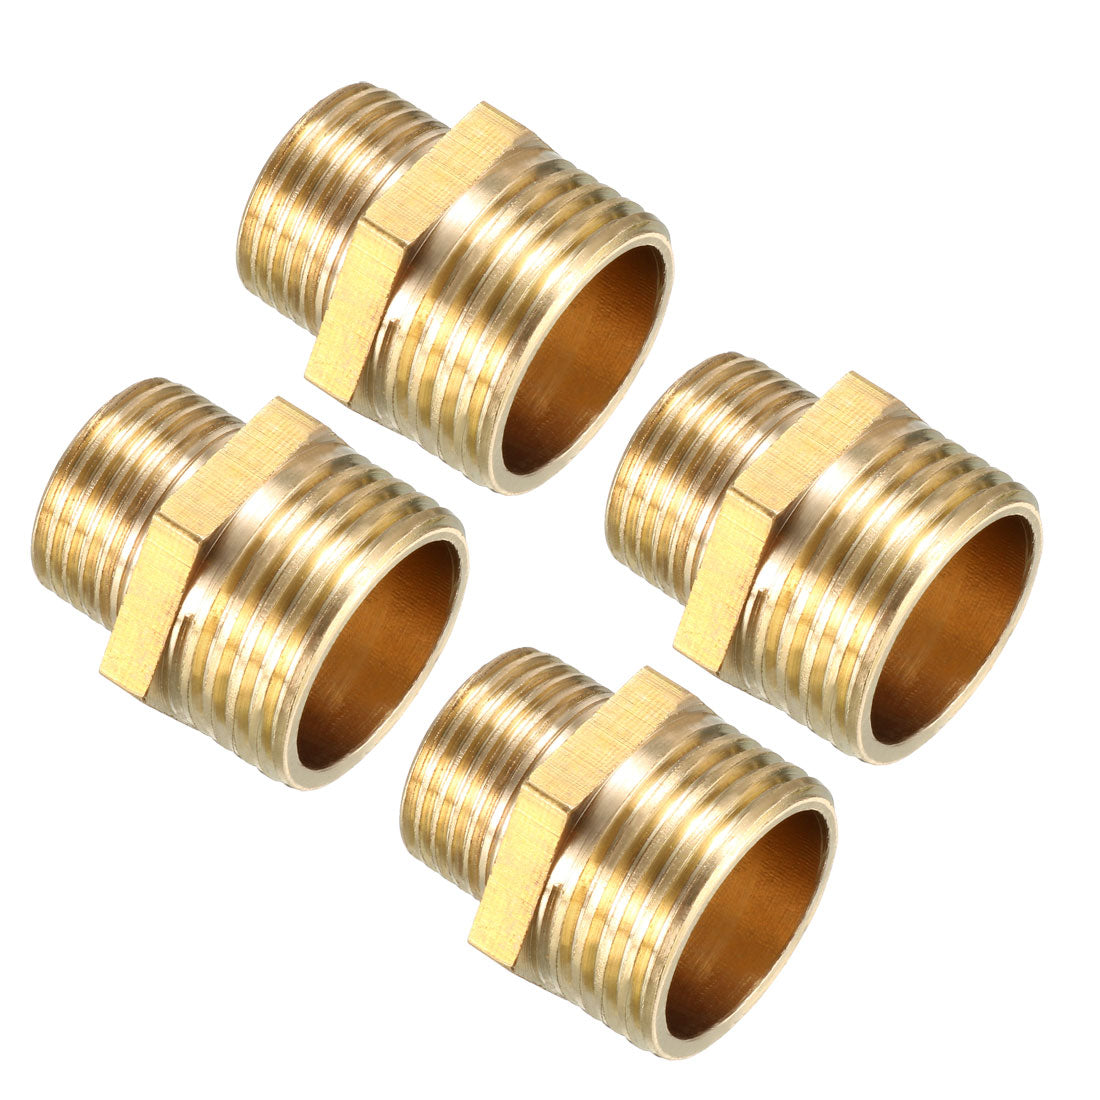 uxcell Uxcell Brass Pipe Fitting Reducing Hex Bushing G1/2 Male x G3/8 Male Adapter 4pcs